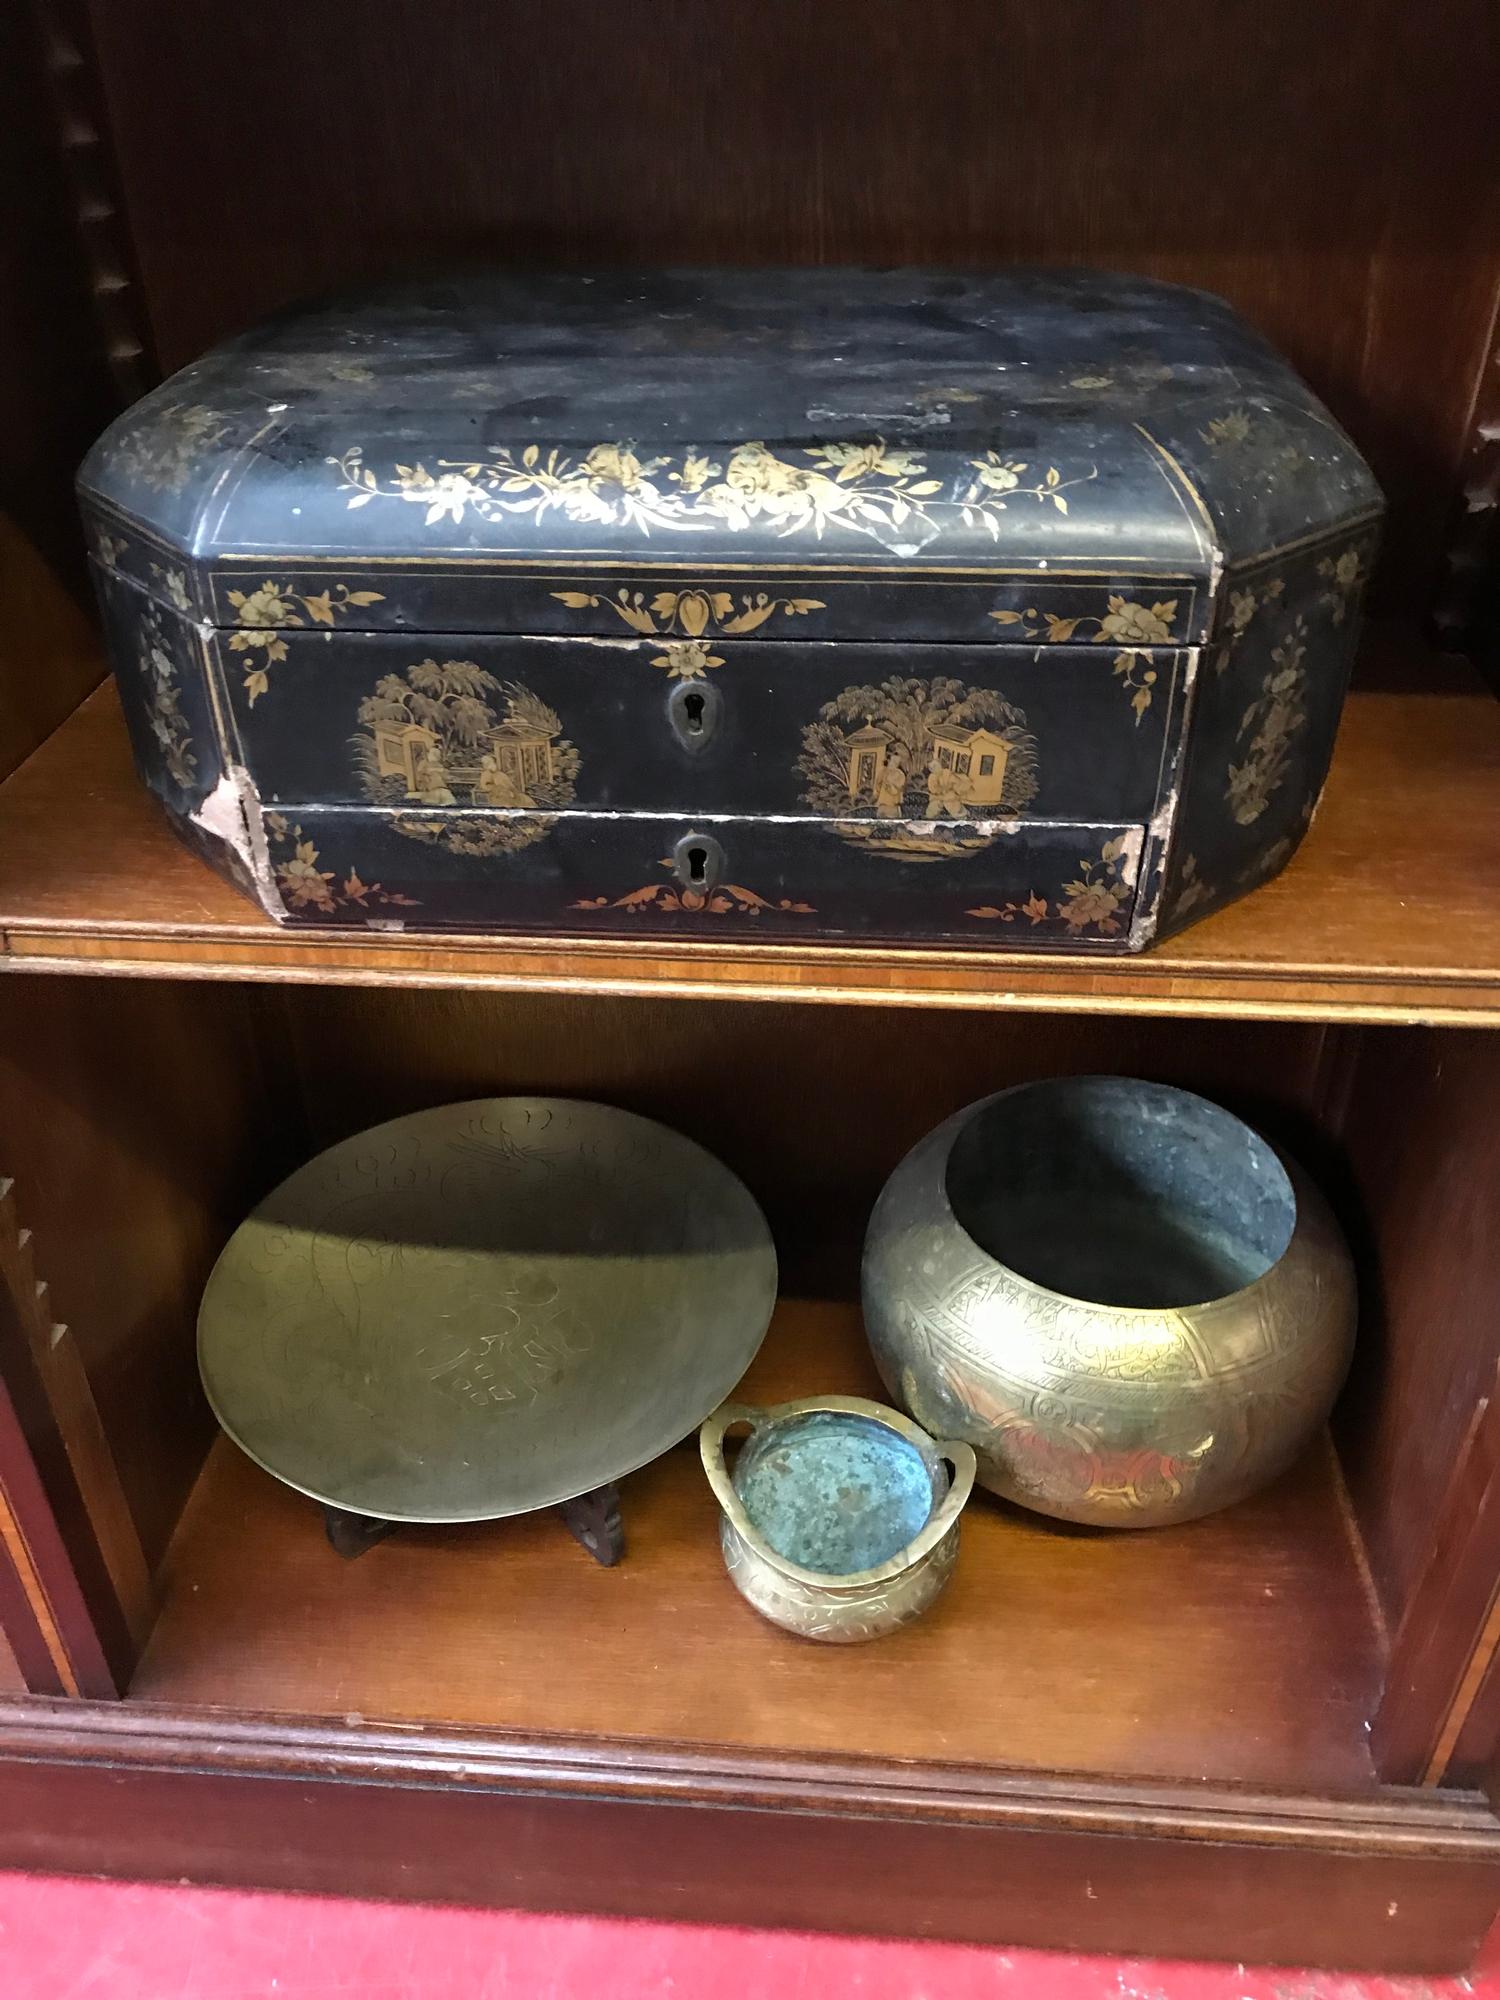 3 Far eastern brass bowls, Censor pot & Lacquered jewellery box (needs attention)